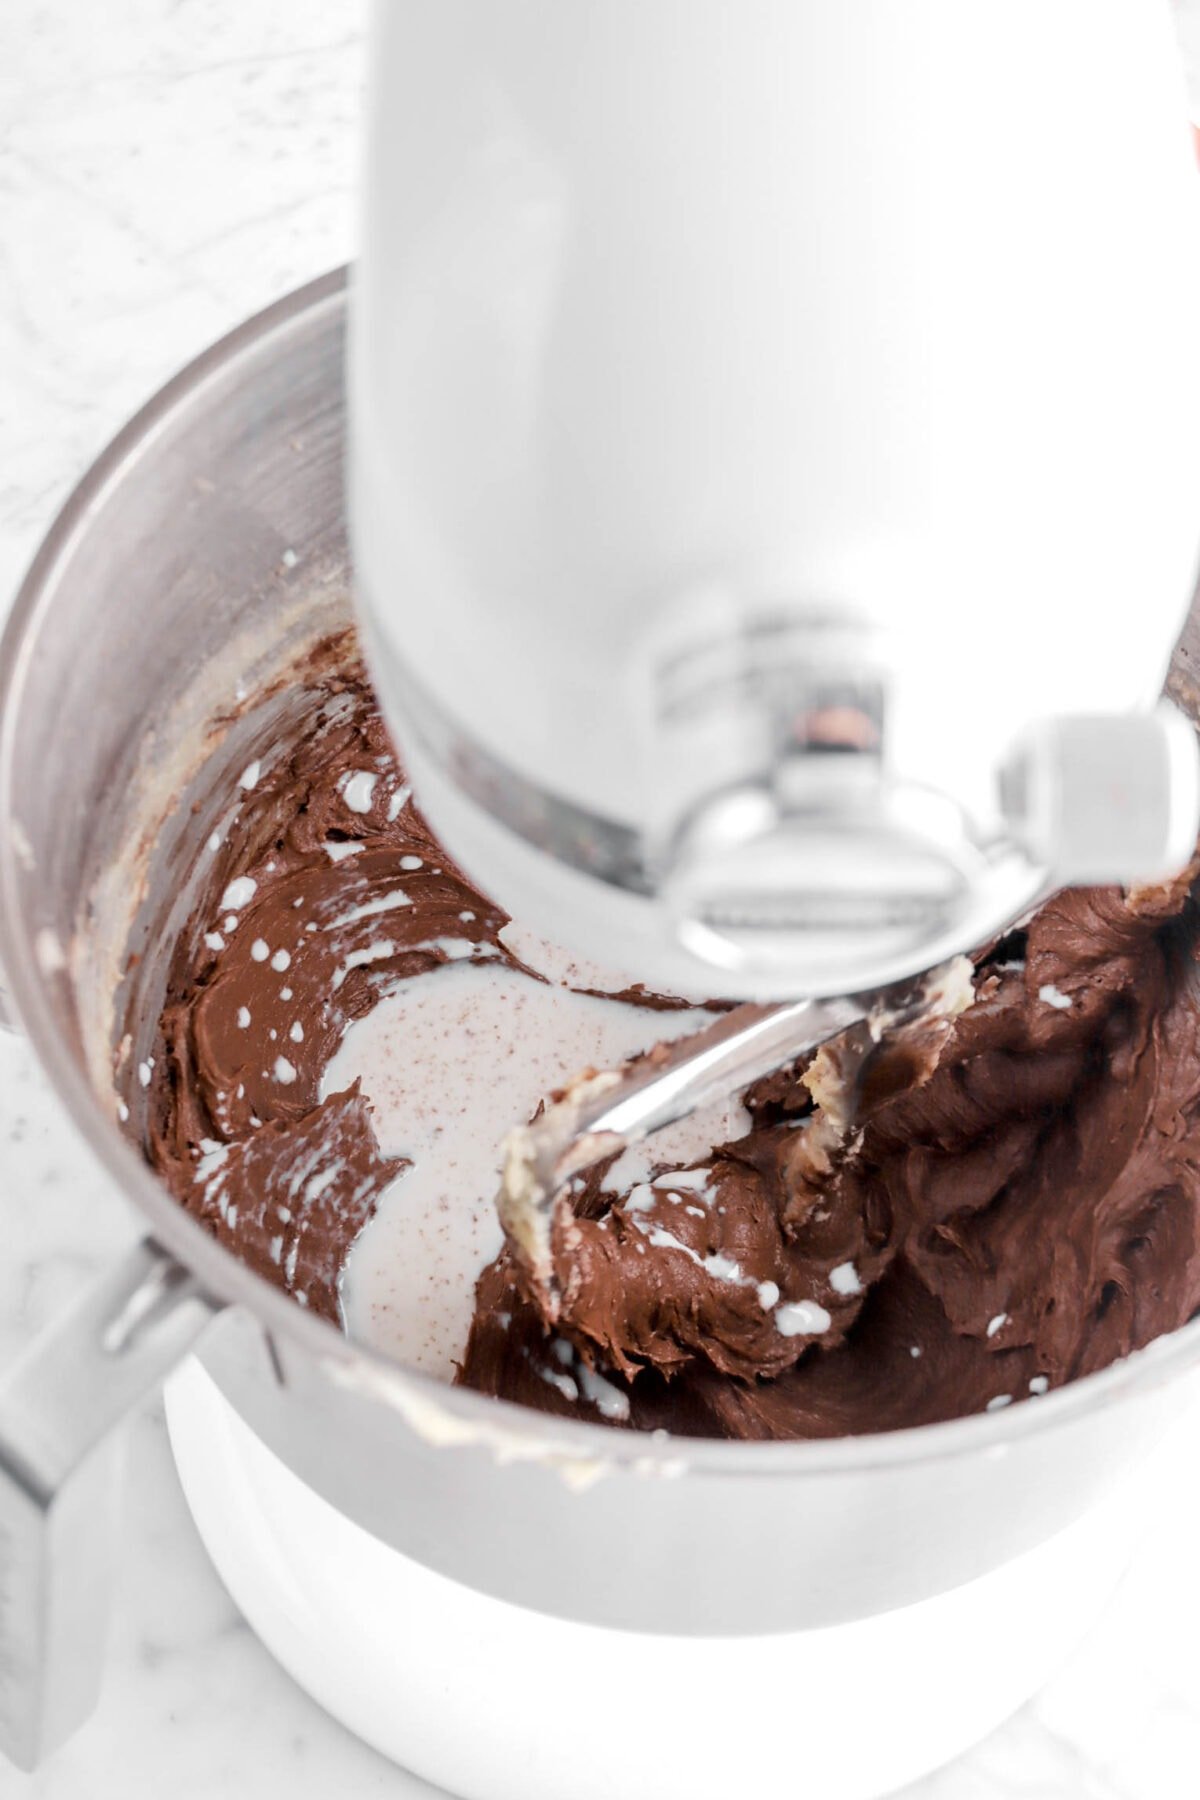 milk added to chocolate batter